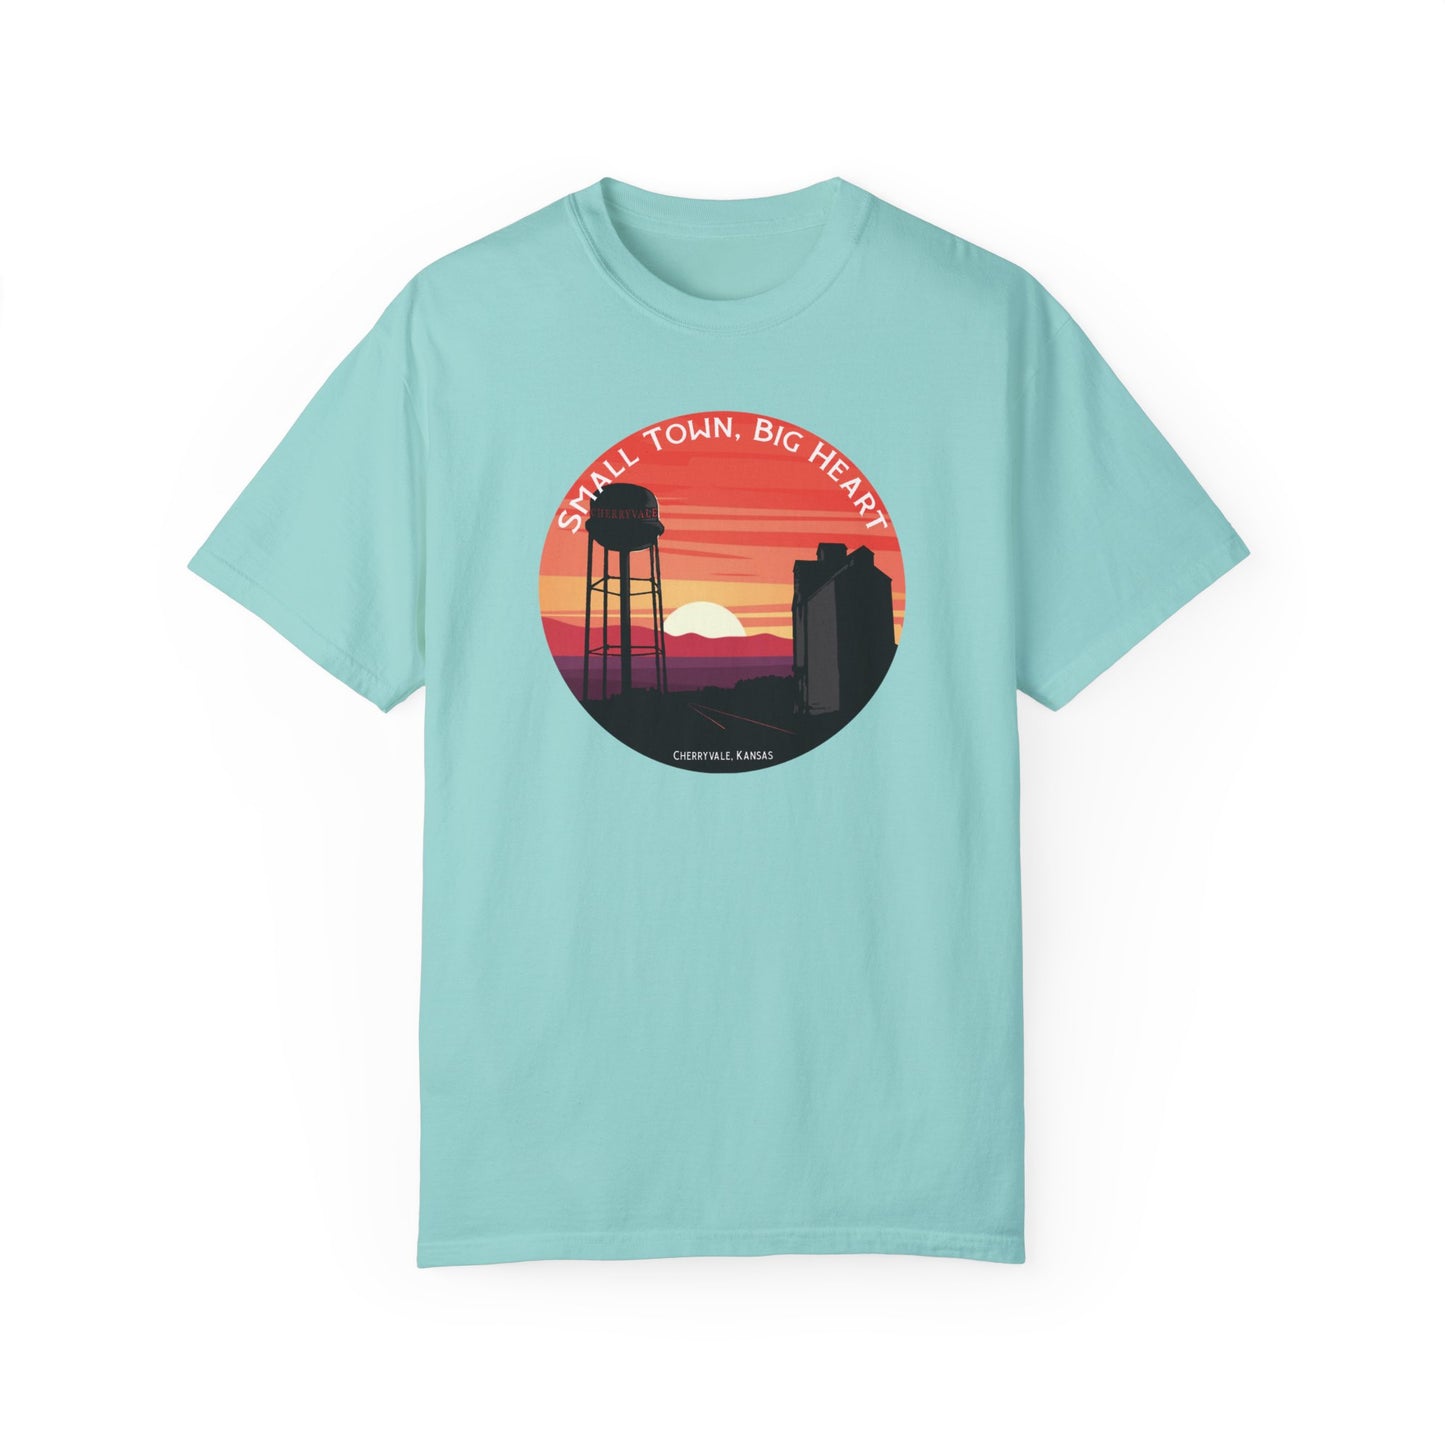 Small Town, Big Heart - Short Sleeve on Comfort Colors